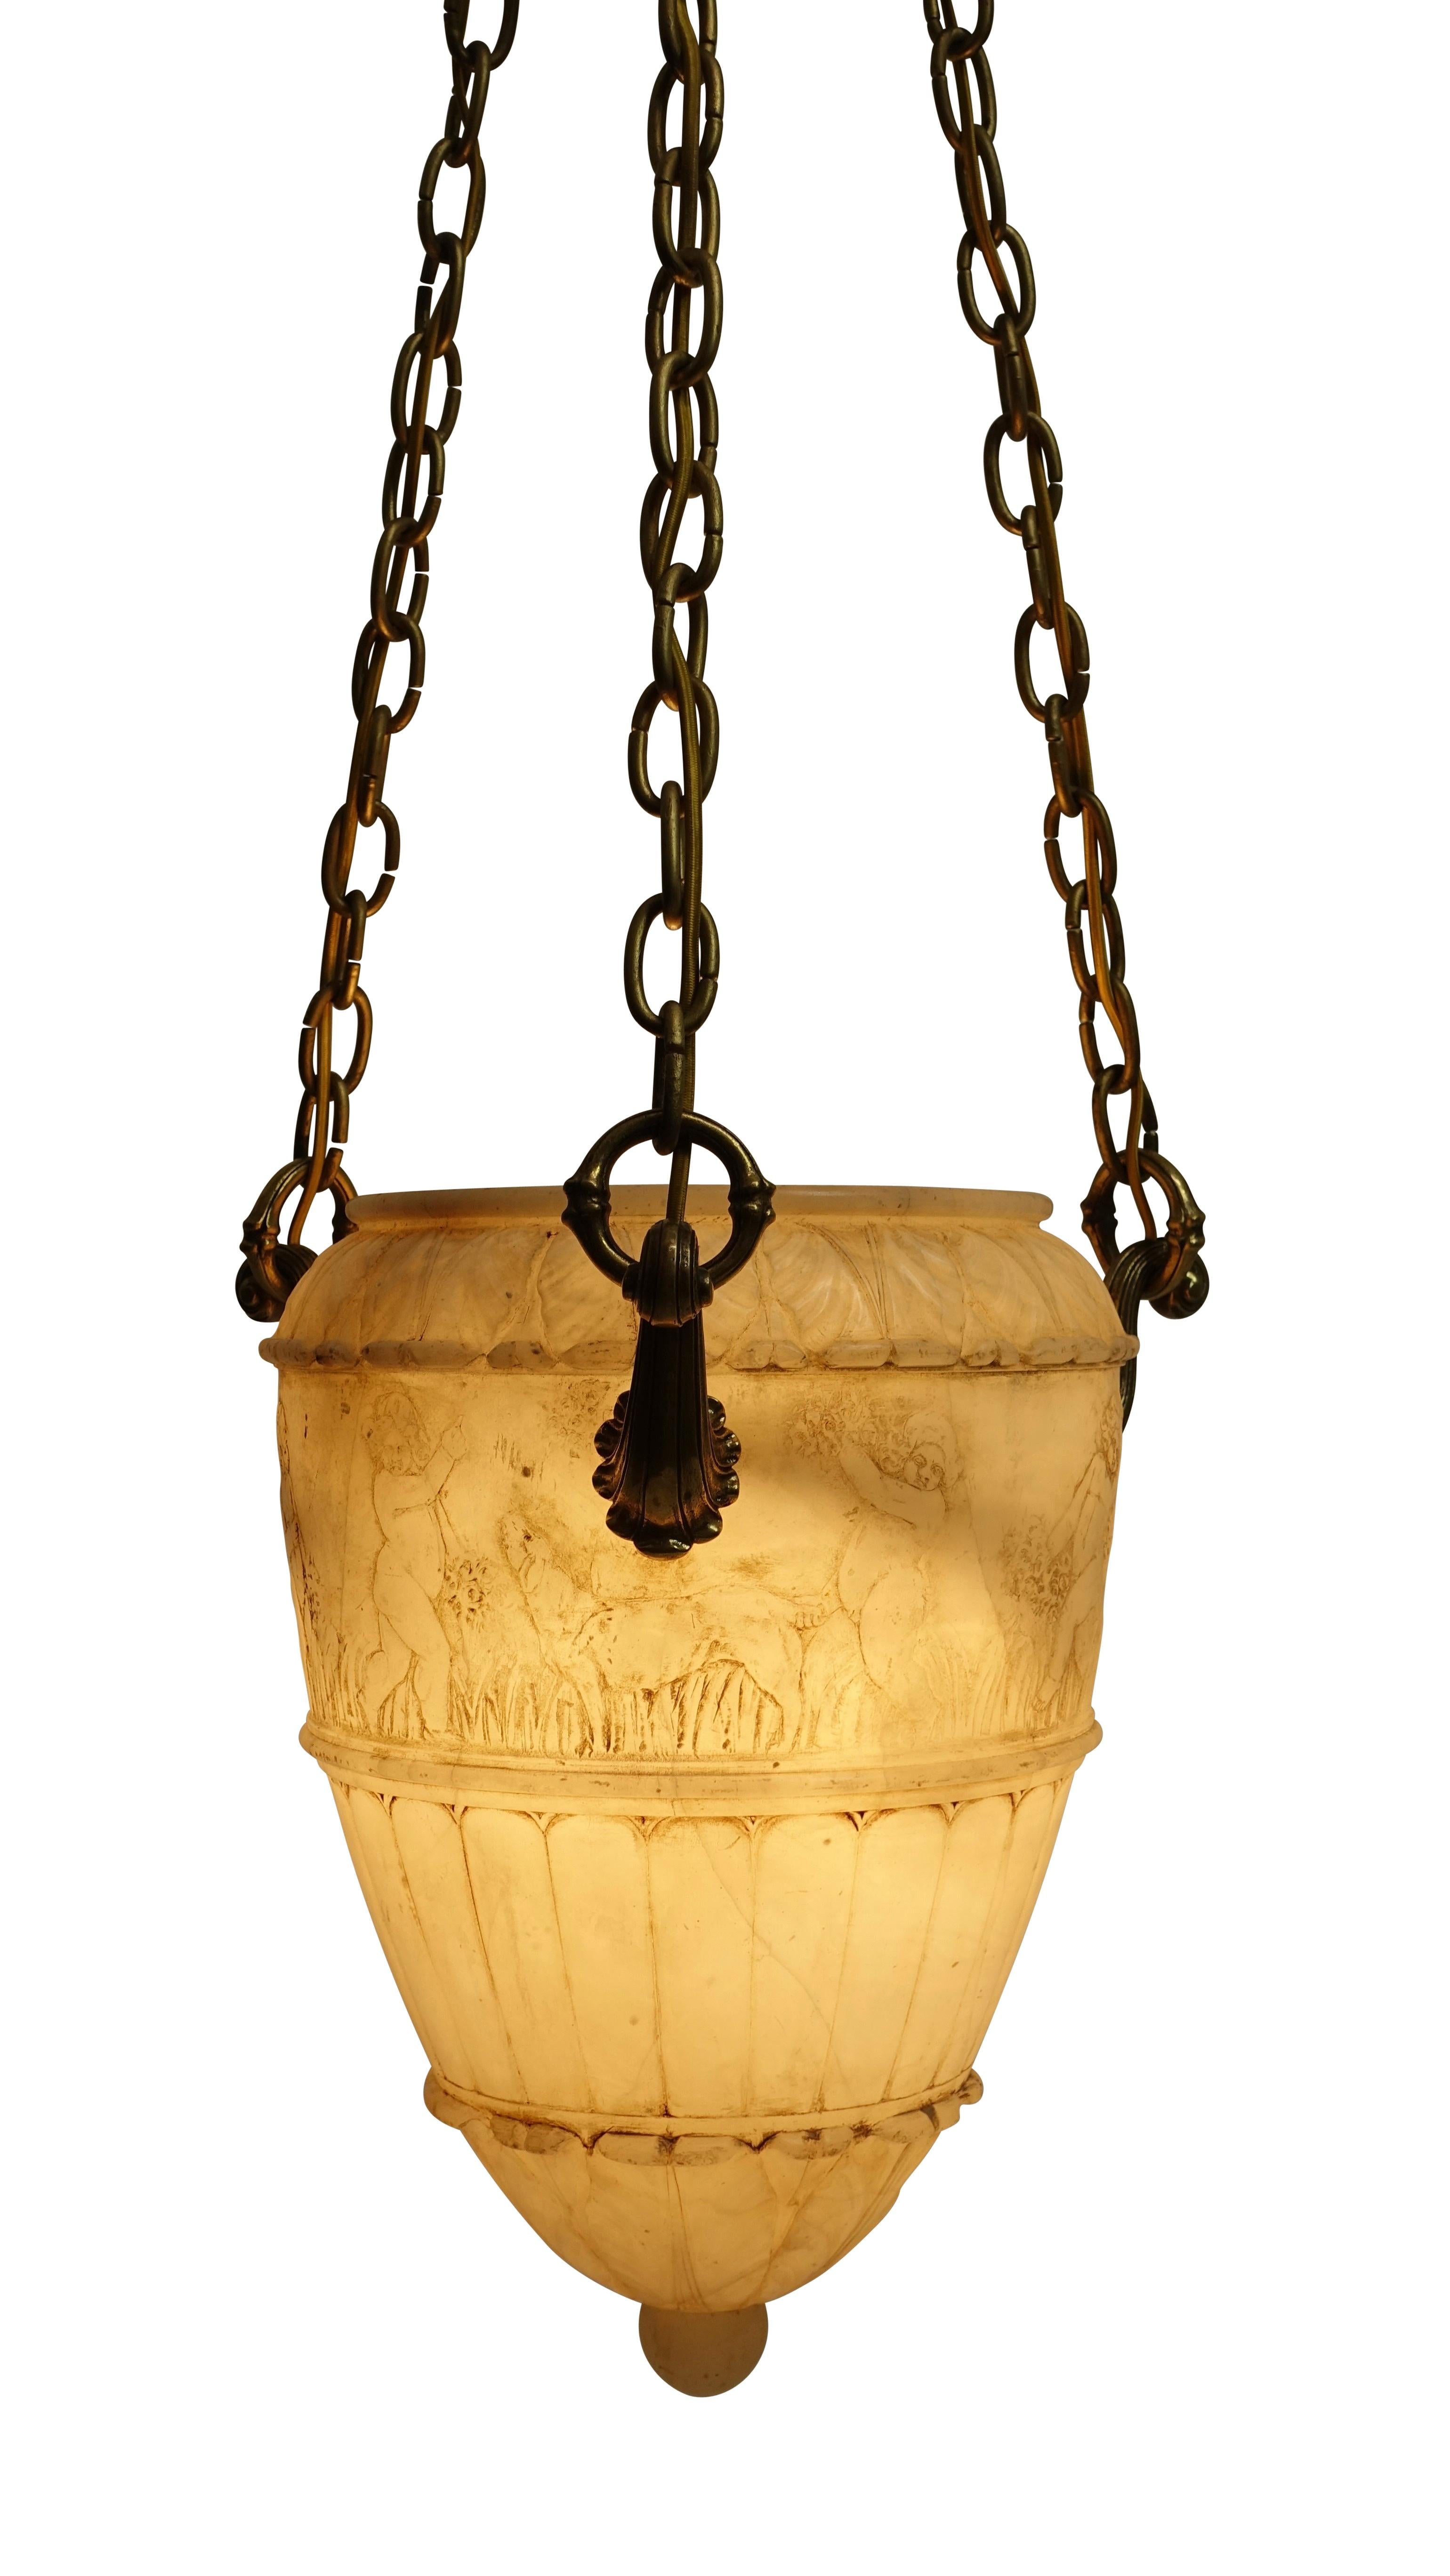 Carved Alabaster Pendant Light Fixture with Brass Hardware, Italian, circa 1910 For Sale 3